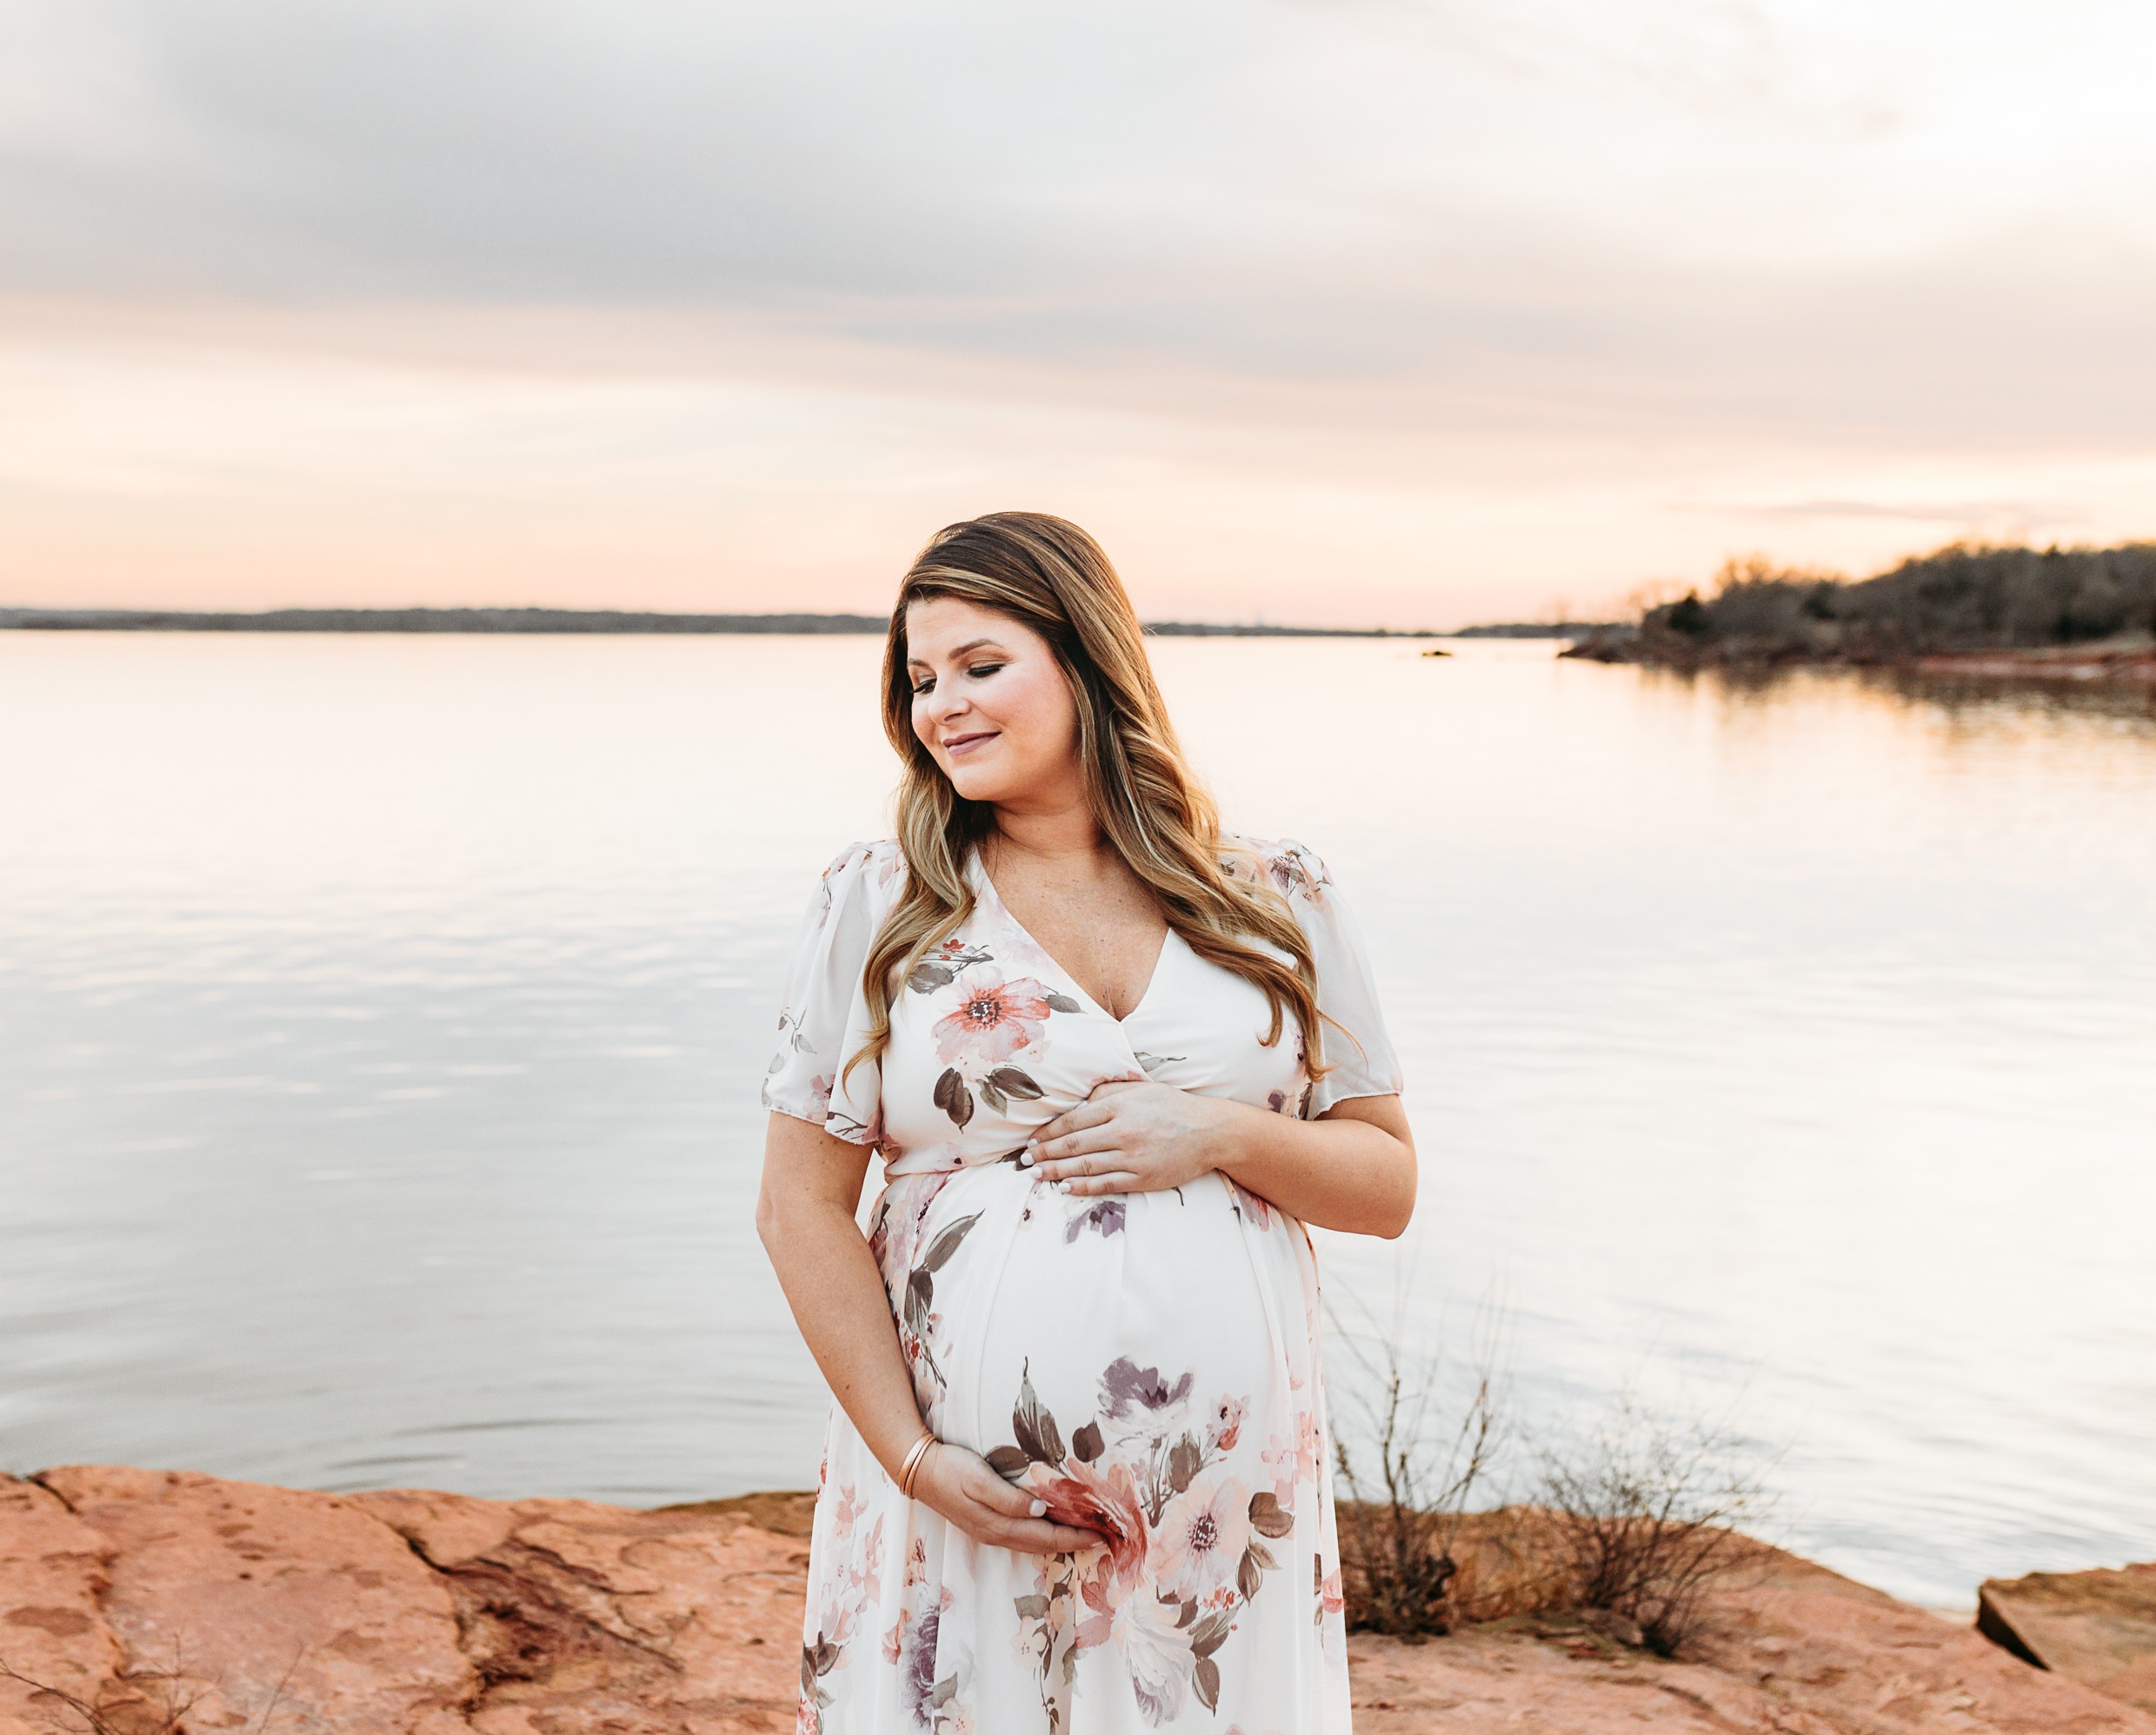 An expecting mom during maternity session at Lake Arcadia.